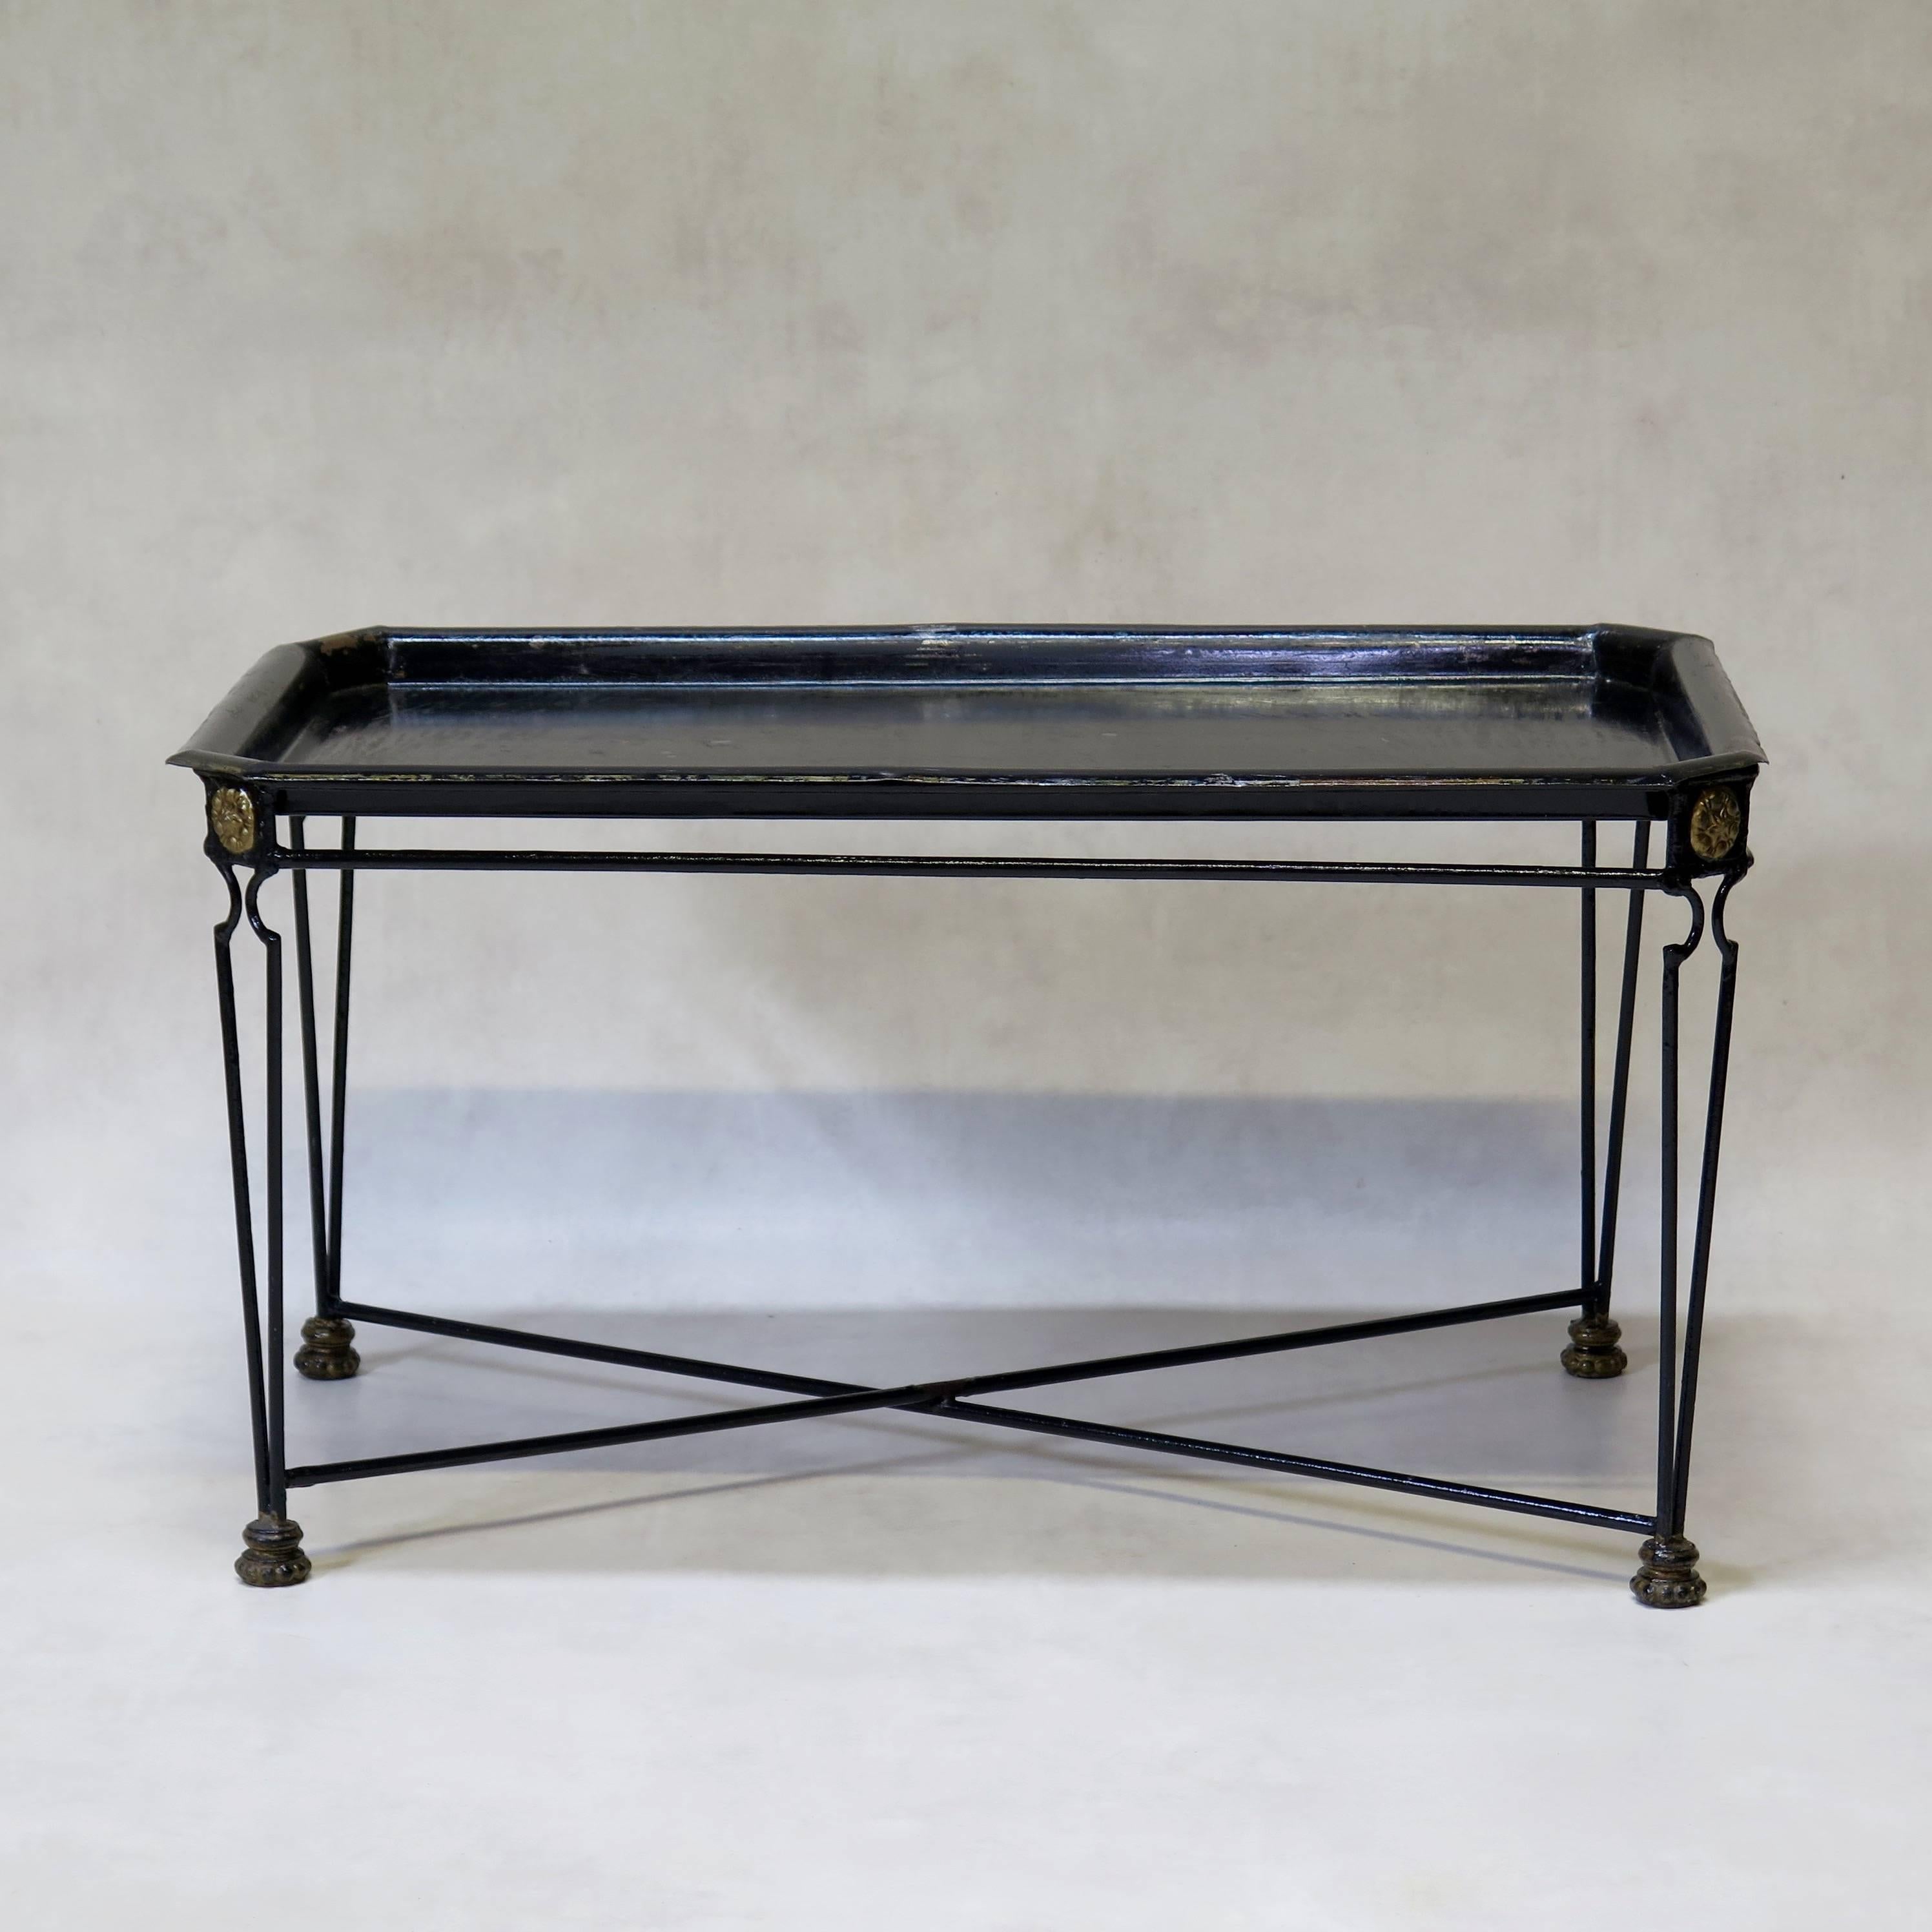 Four Black Painted Metal Tray Tables in the 1940s Style, France, circa 1960s In Good Condition For Sale In Isle Sur La Sorgue, Vaucluse